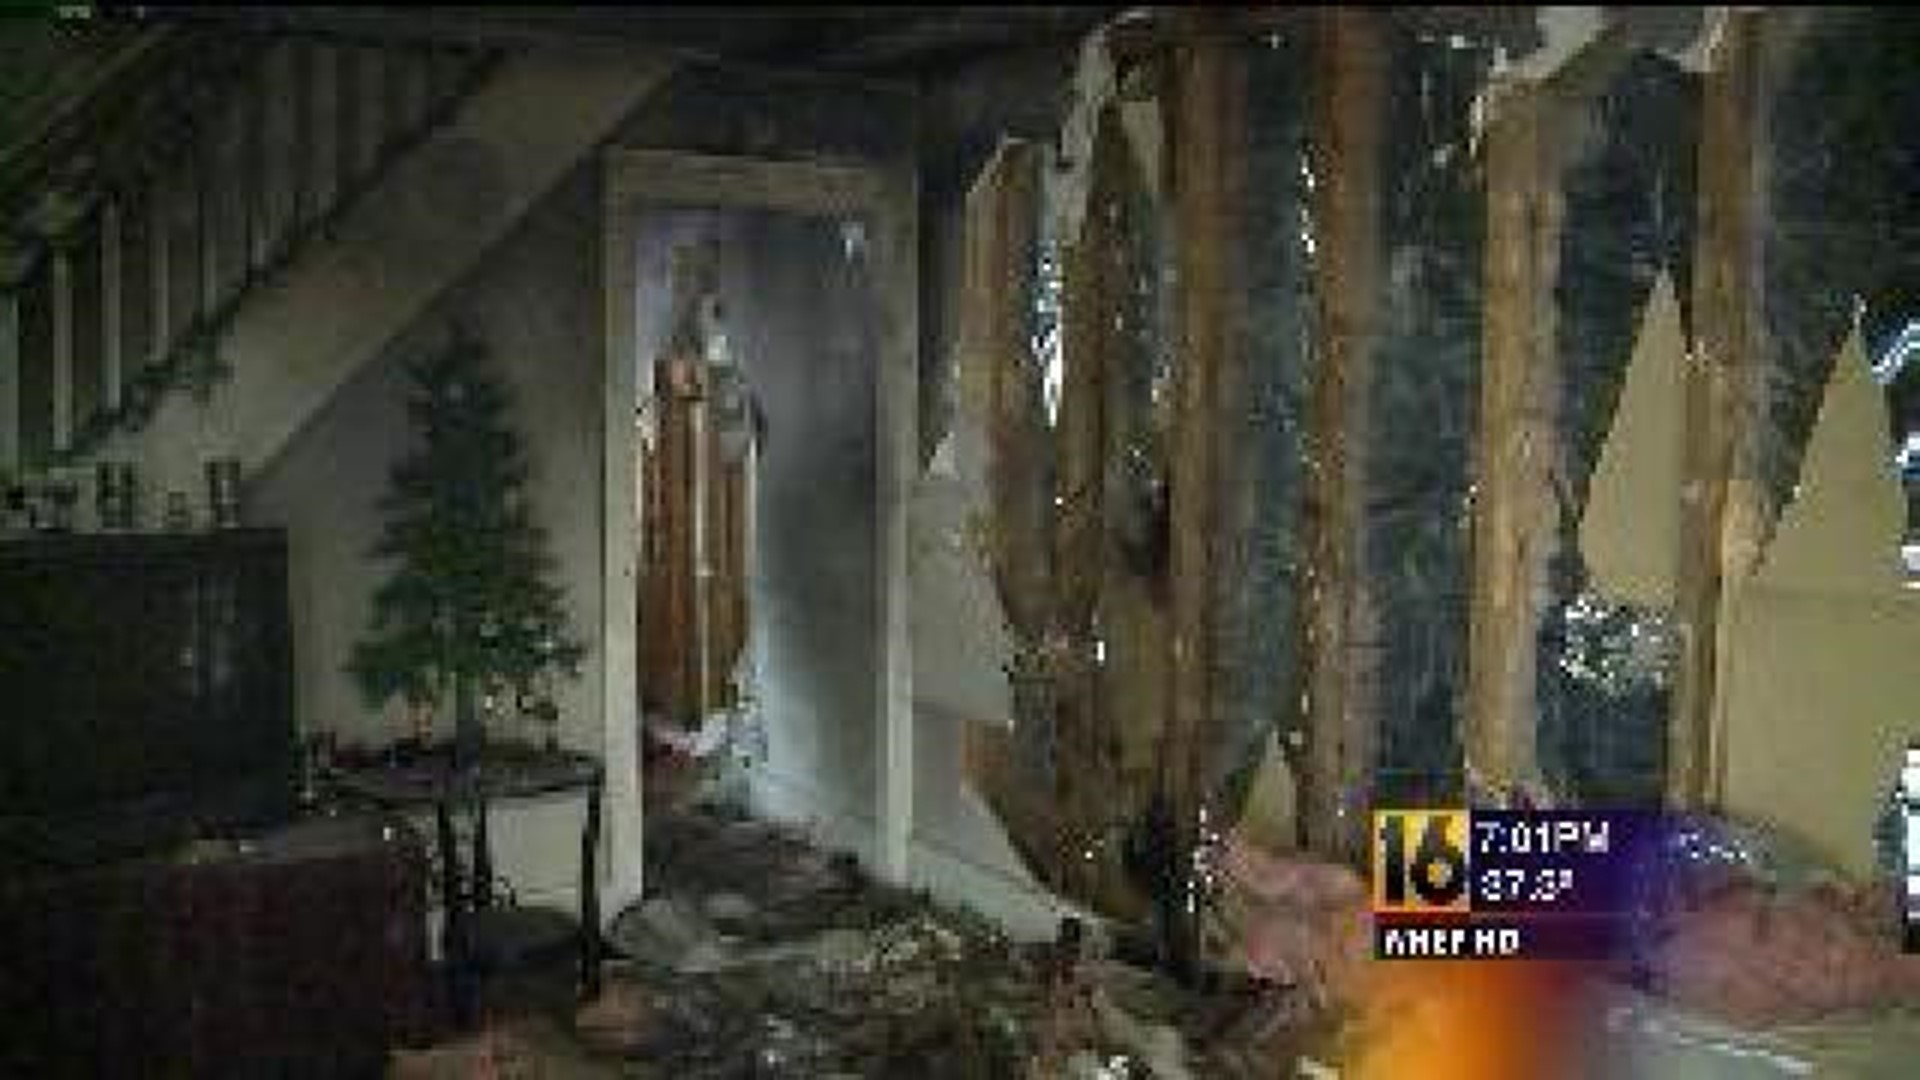 Fire Destroys Family’s Christmas Gifts